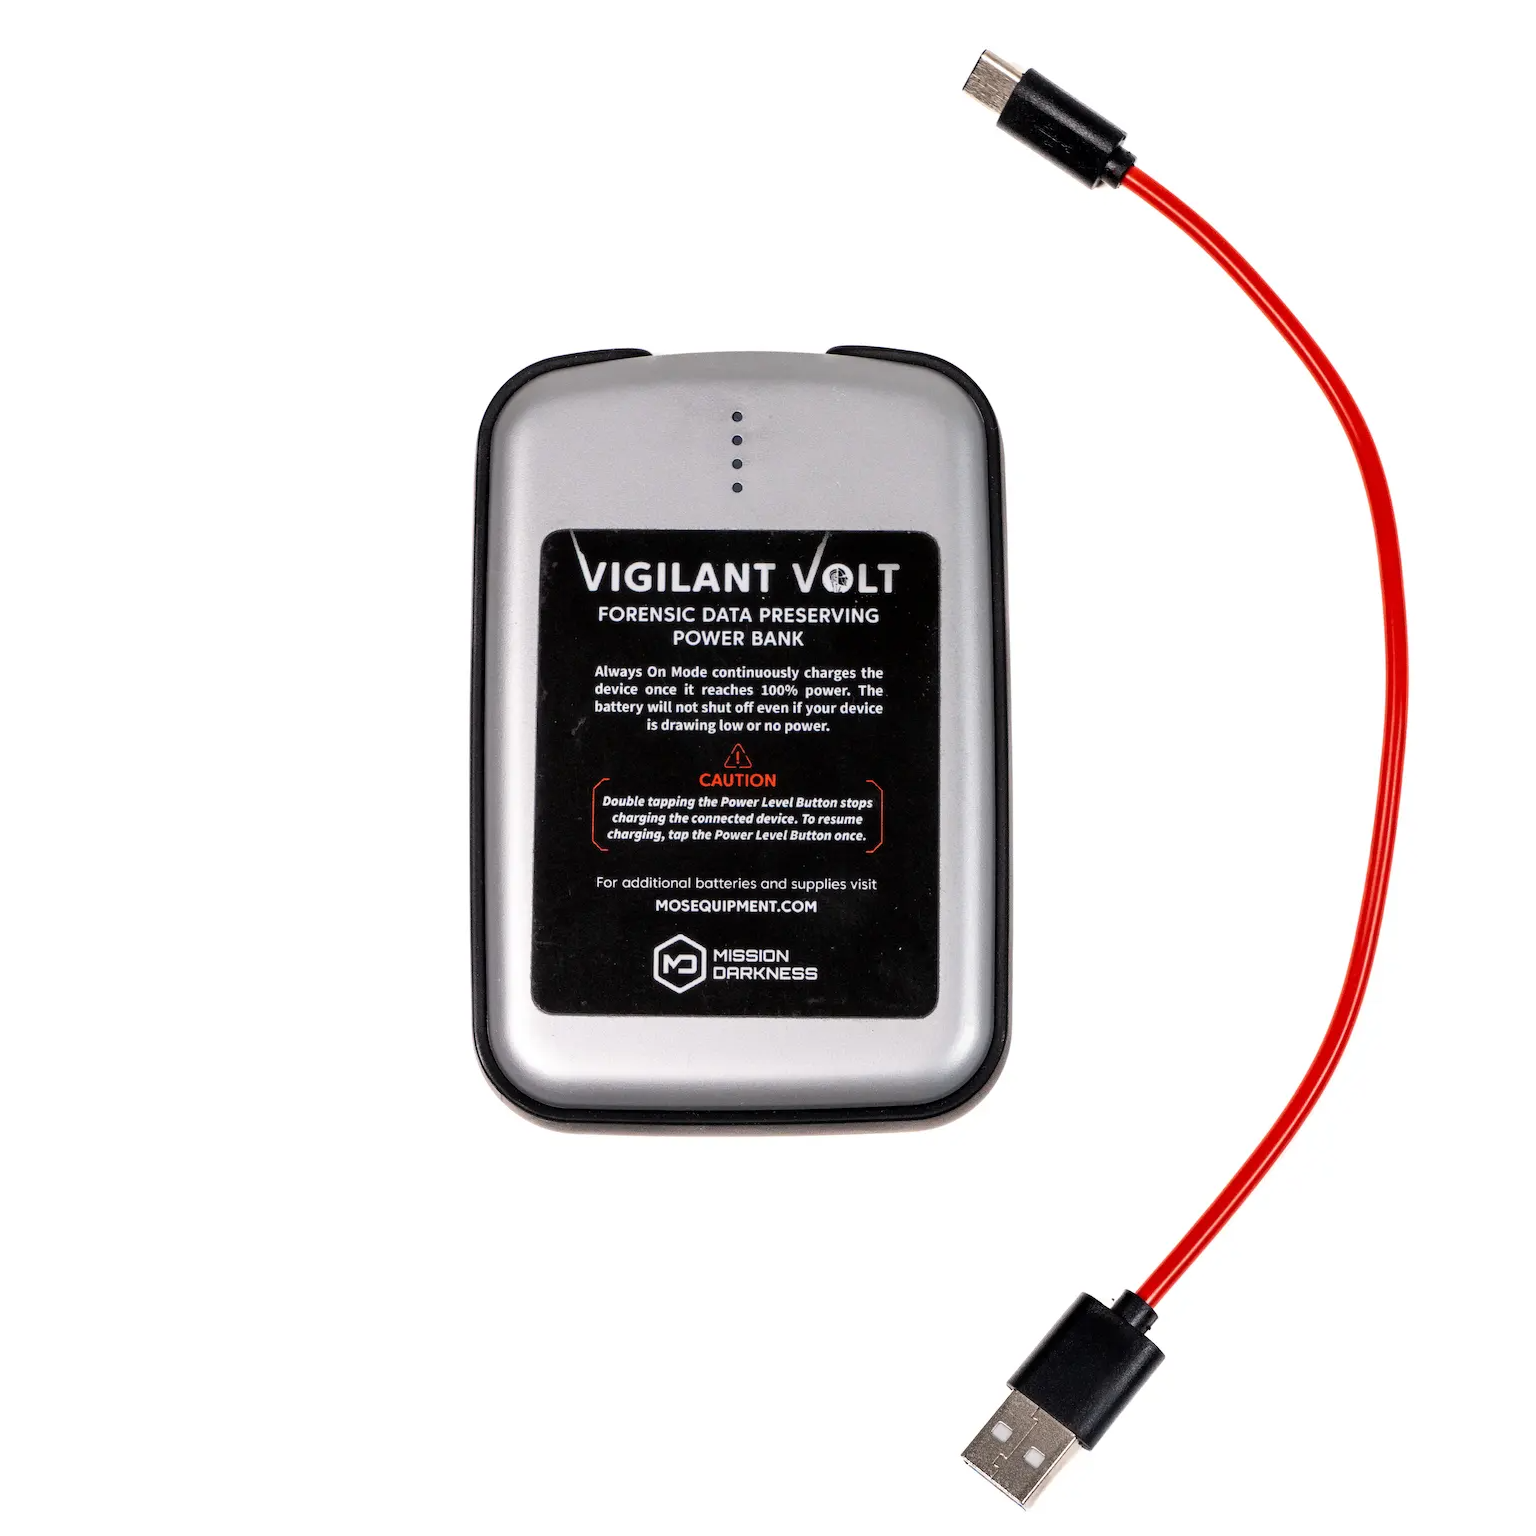 MIssion Darkness Vigilant Volt Forensic Data Preserving Power Bank - Small Battery Size